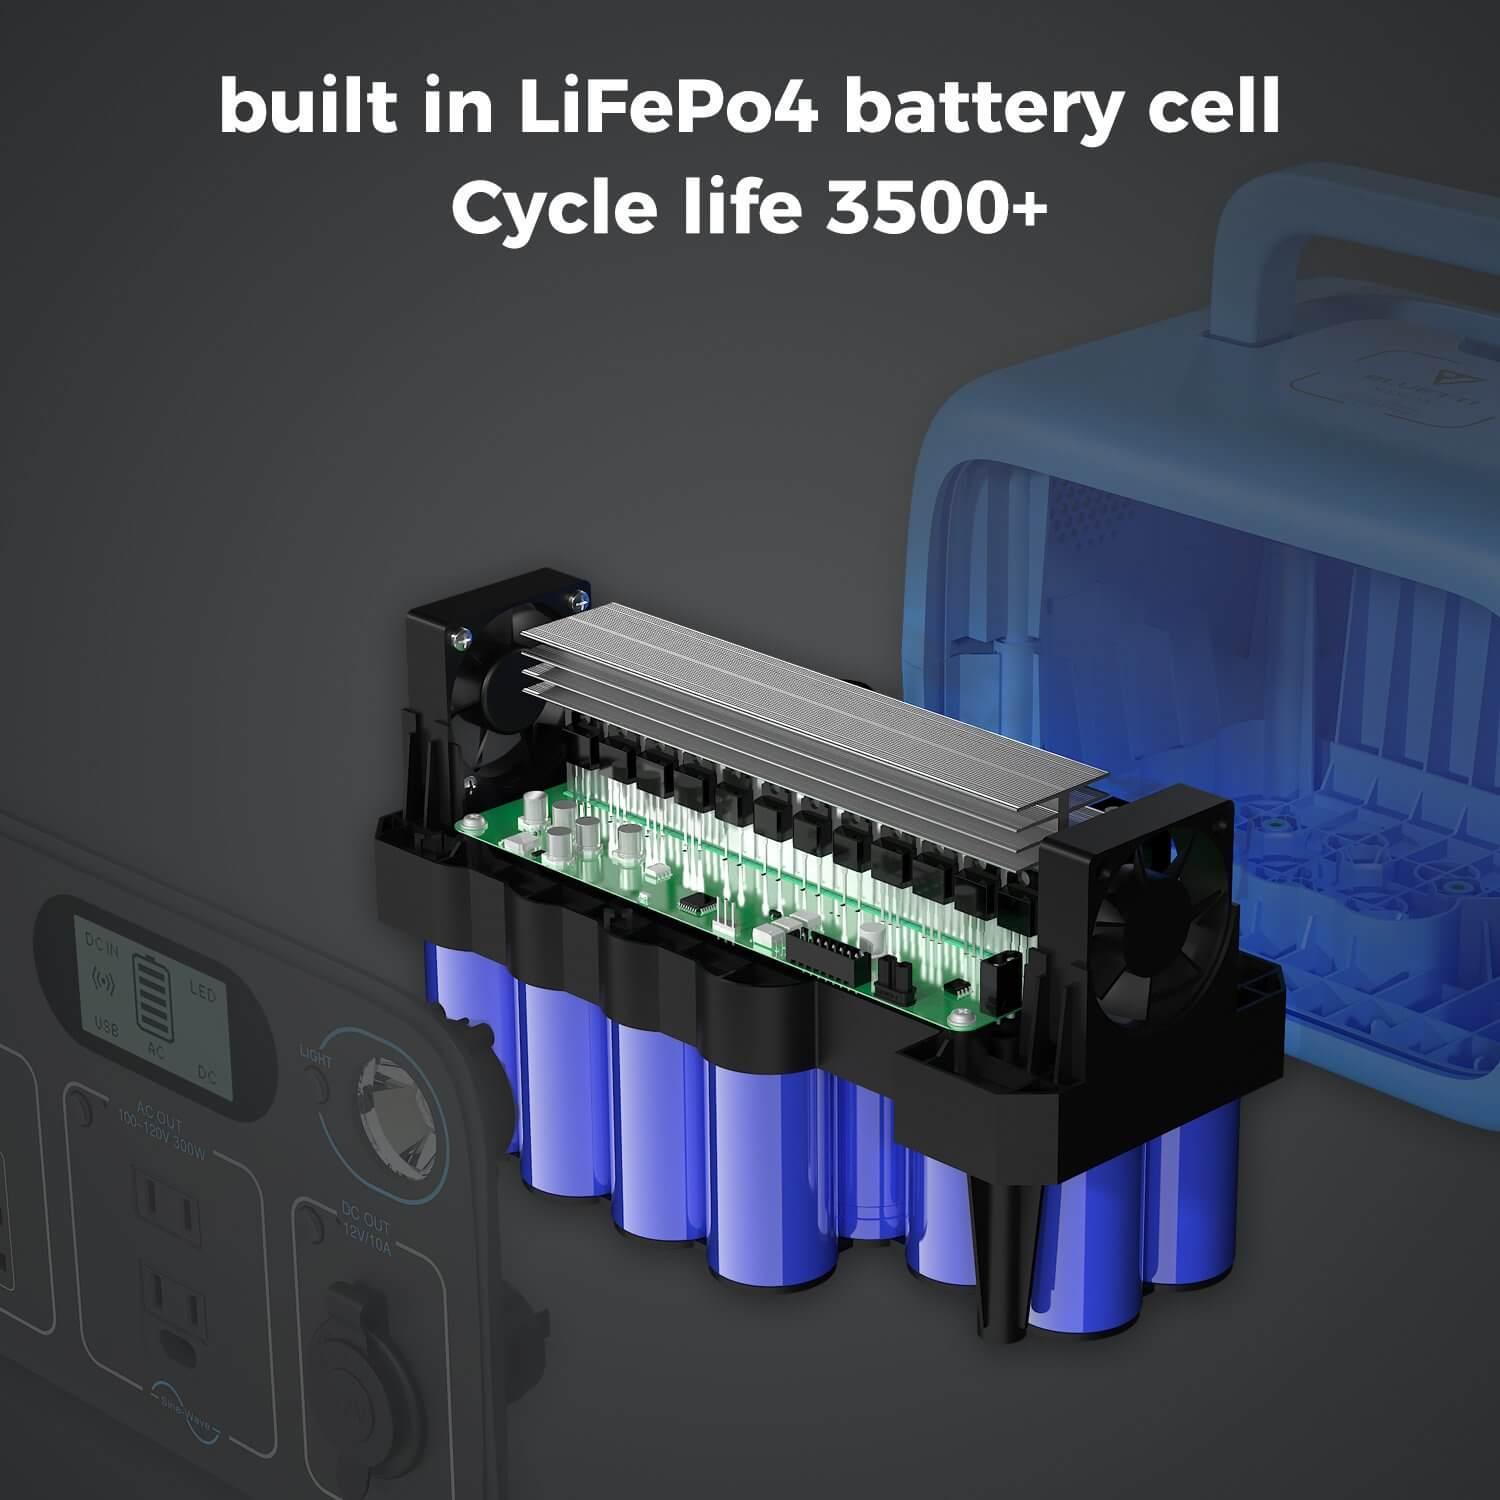 maxoak bluetti ac30 power station built in lifepo4 battery cell cycle life 3500+